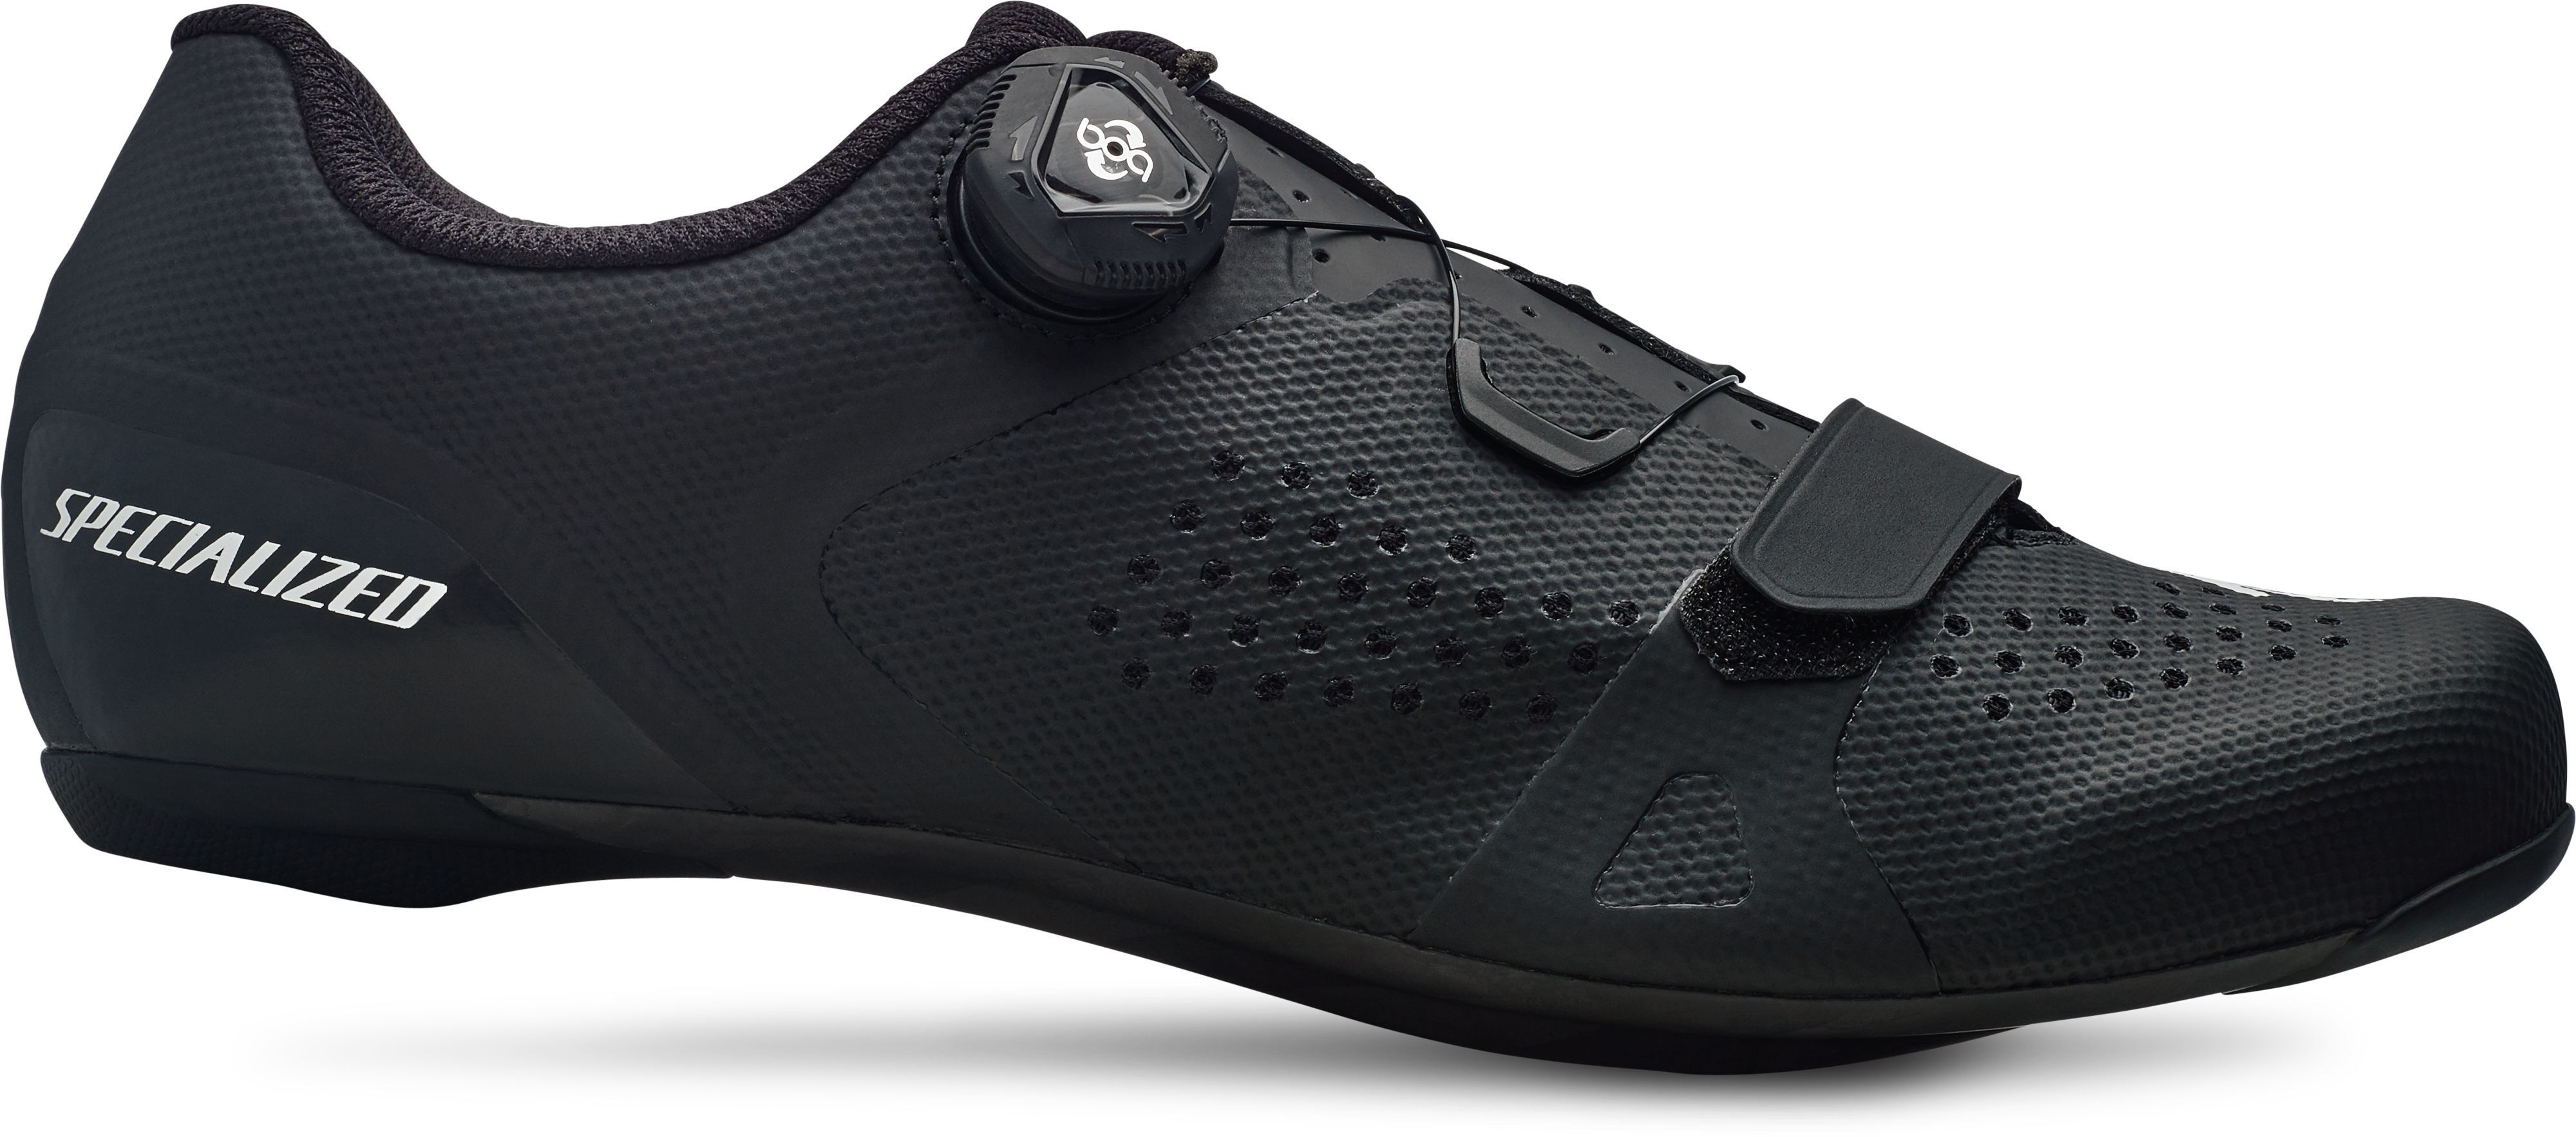 Torch 2.0 Road Shoes | Specialized.com